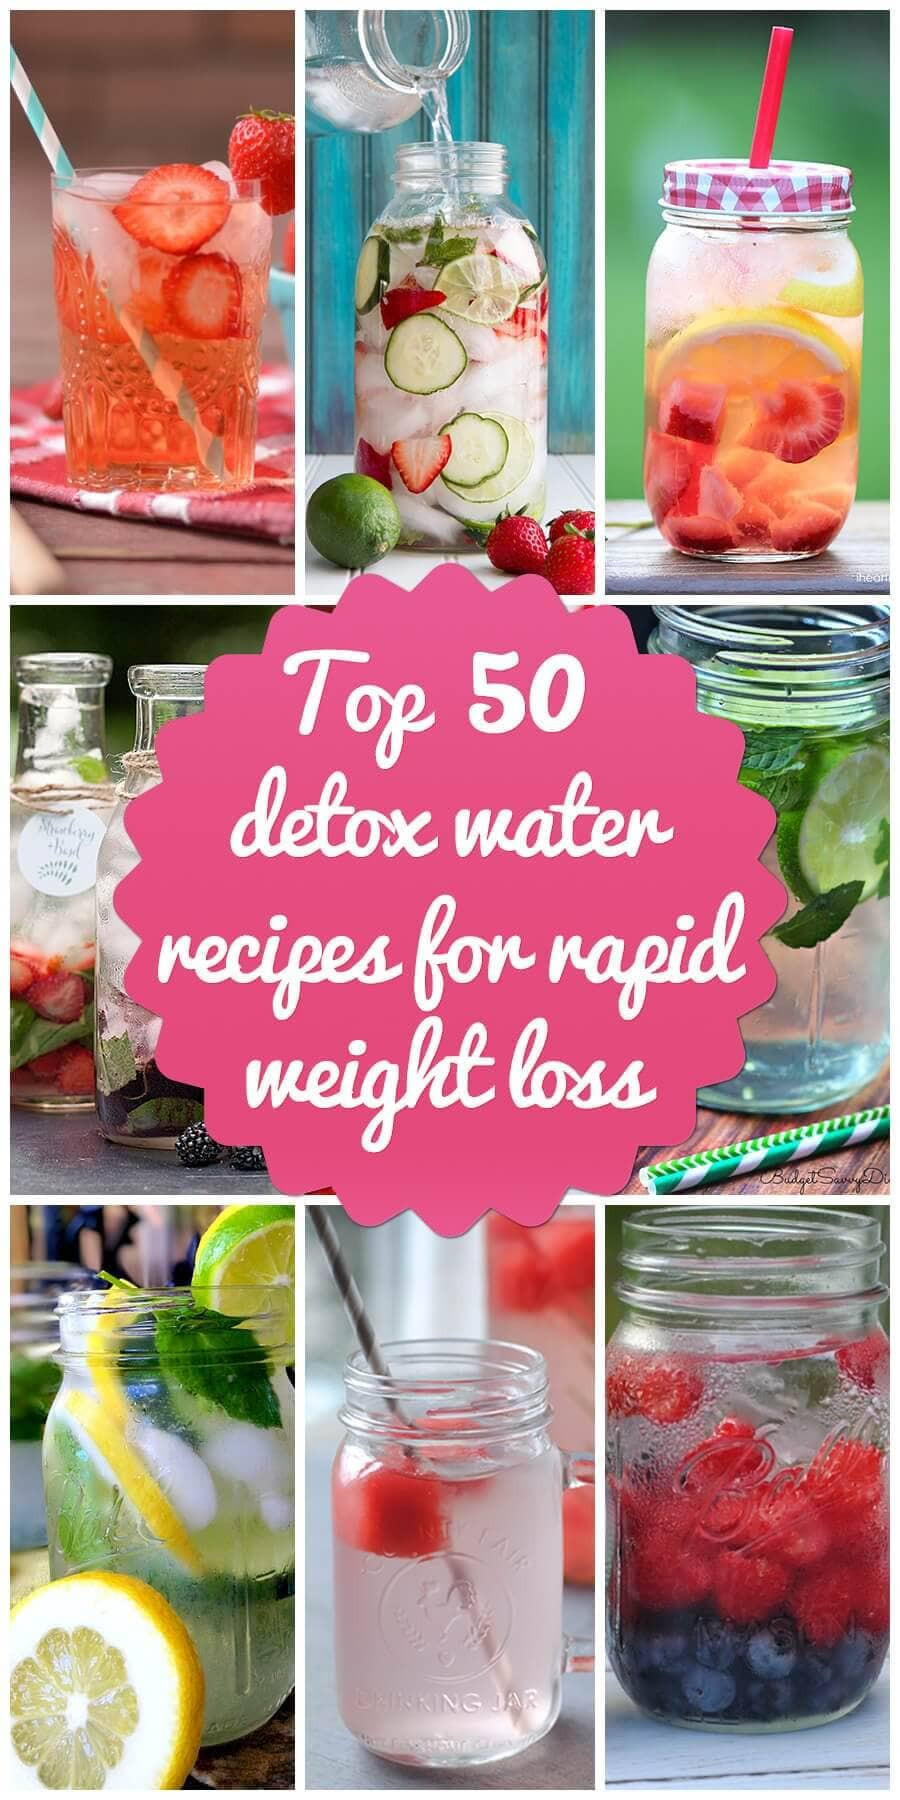 Detox Drinks Recipes For Weight Loss
 Top 50 Detox Water Recipes for Rapid Weight Loss